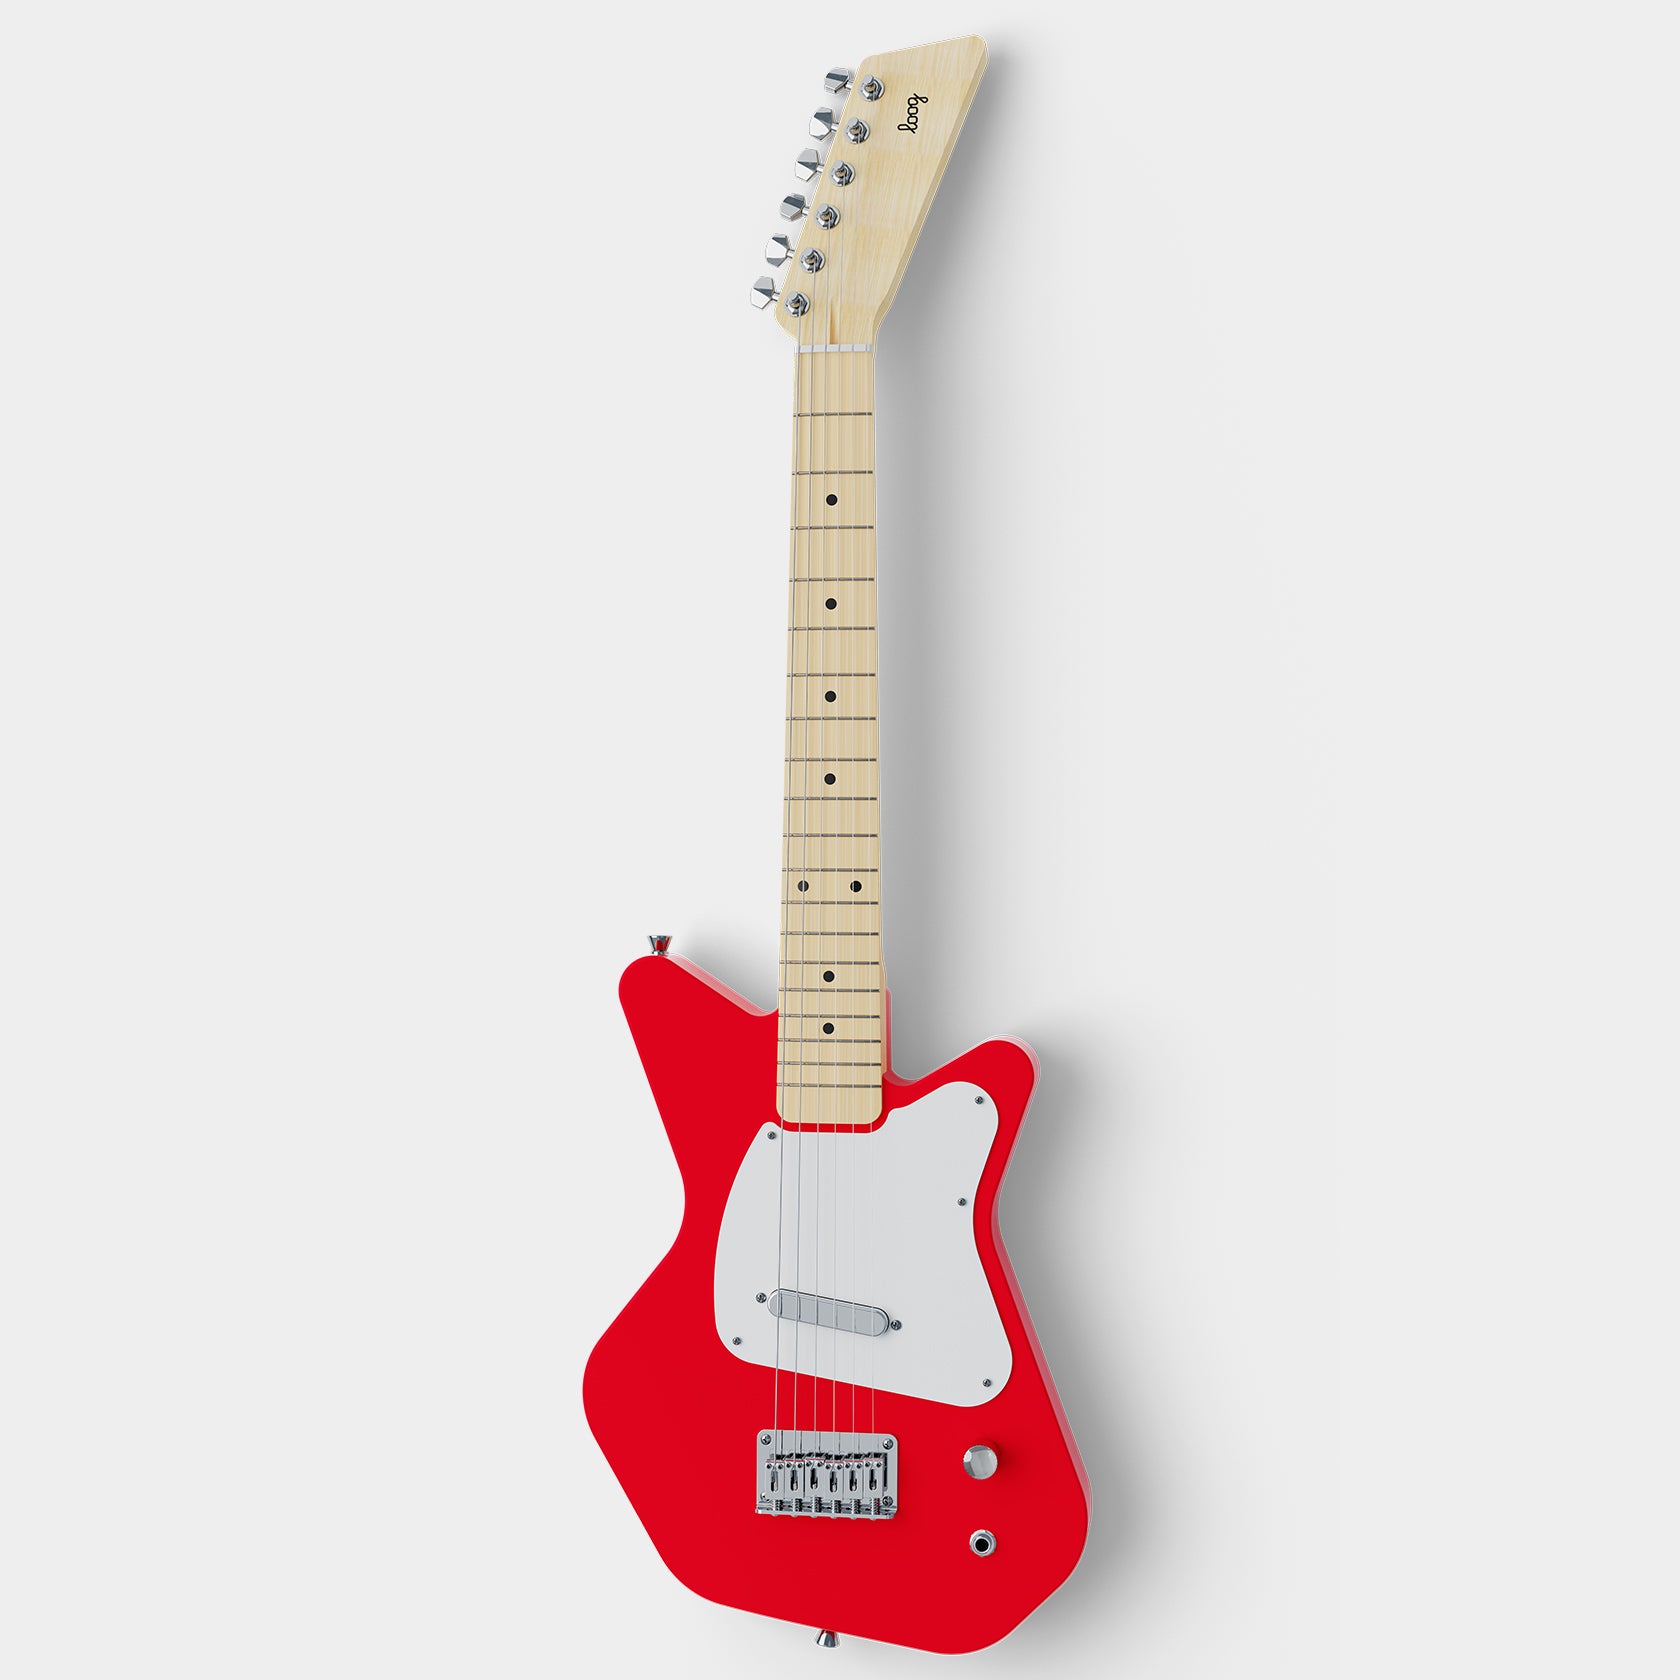 red electric guitar